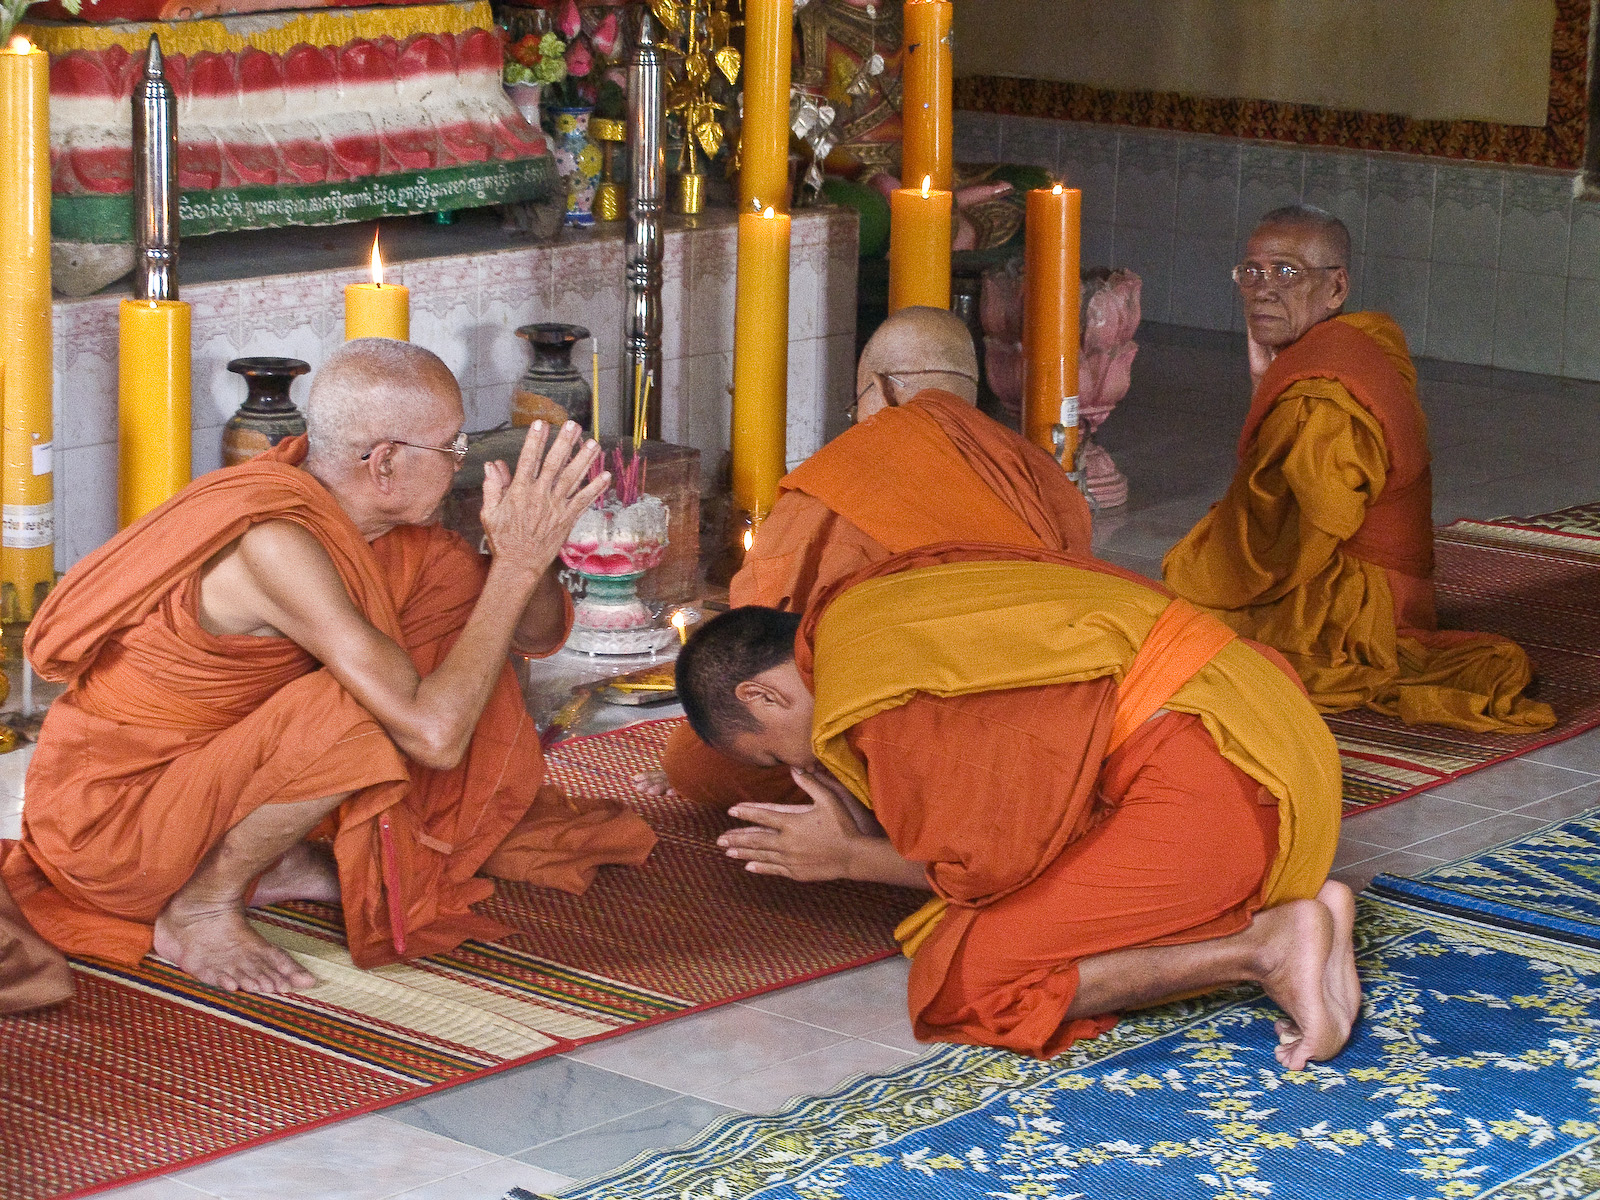 two monks praying together on a rug in a religious area